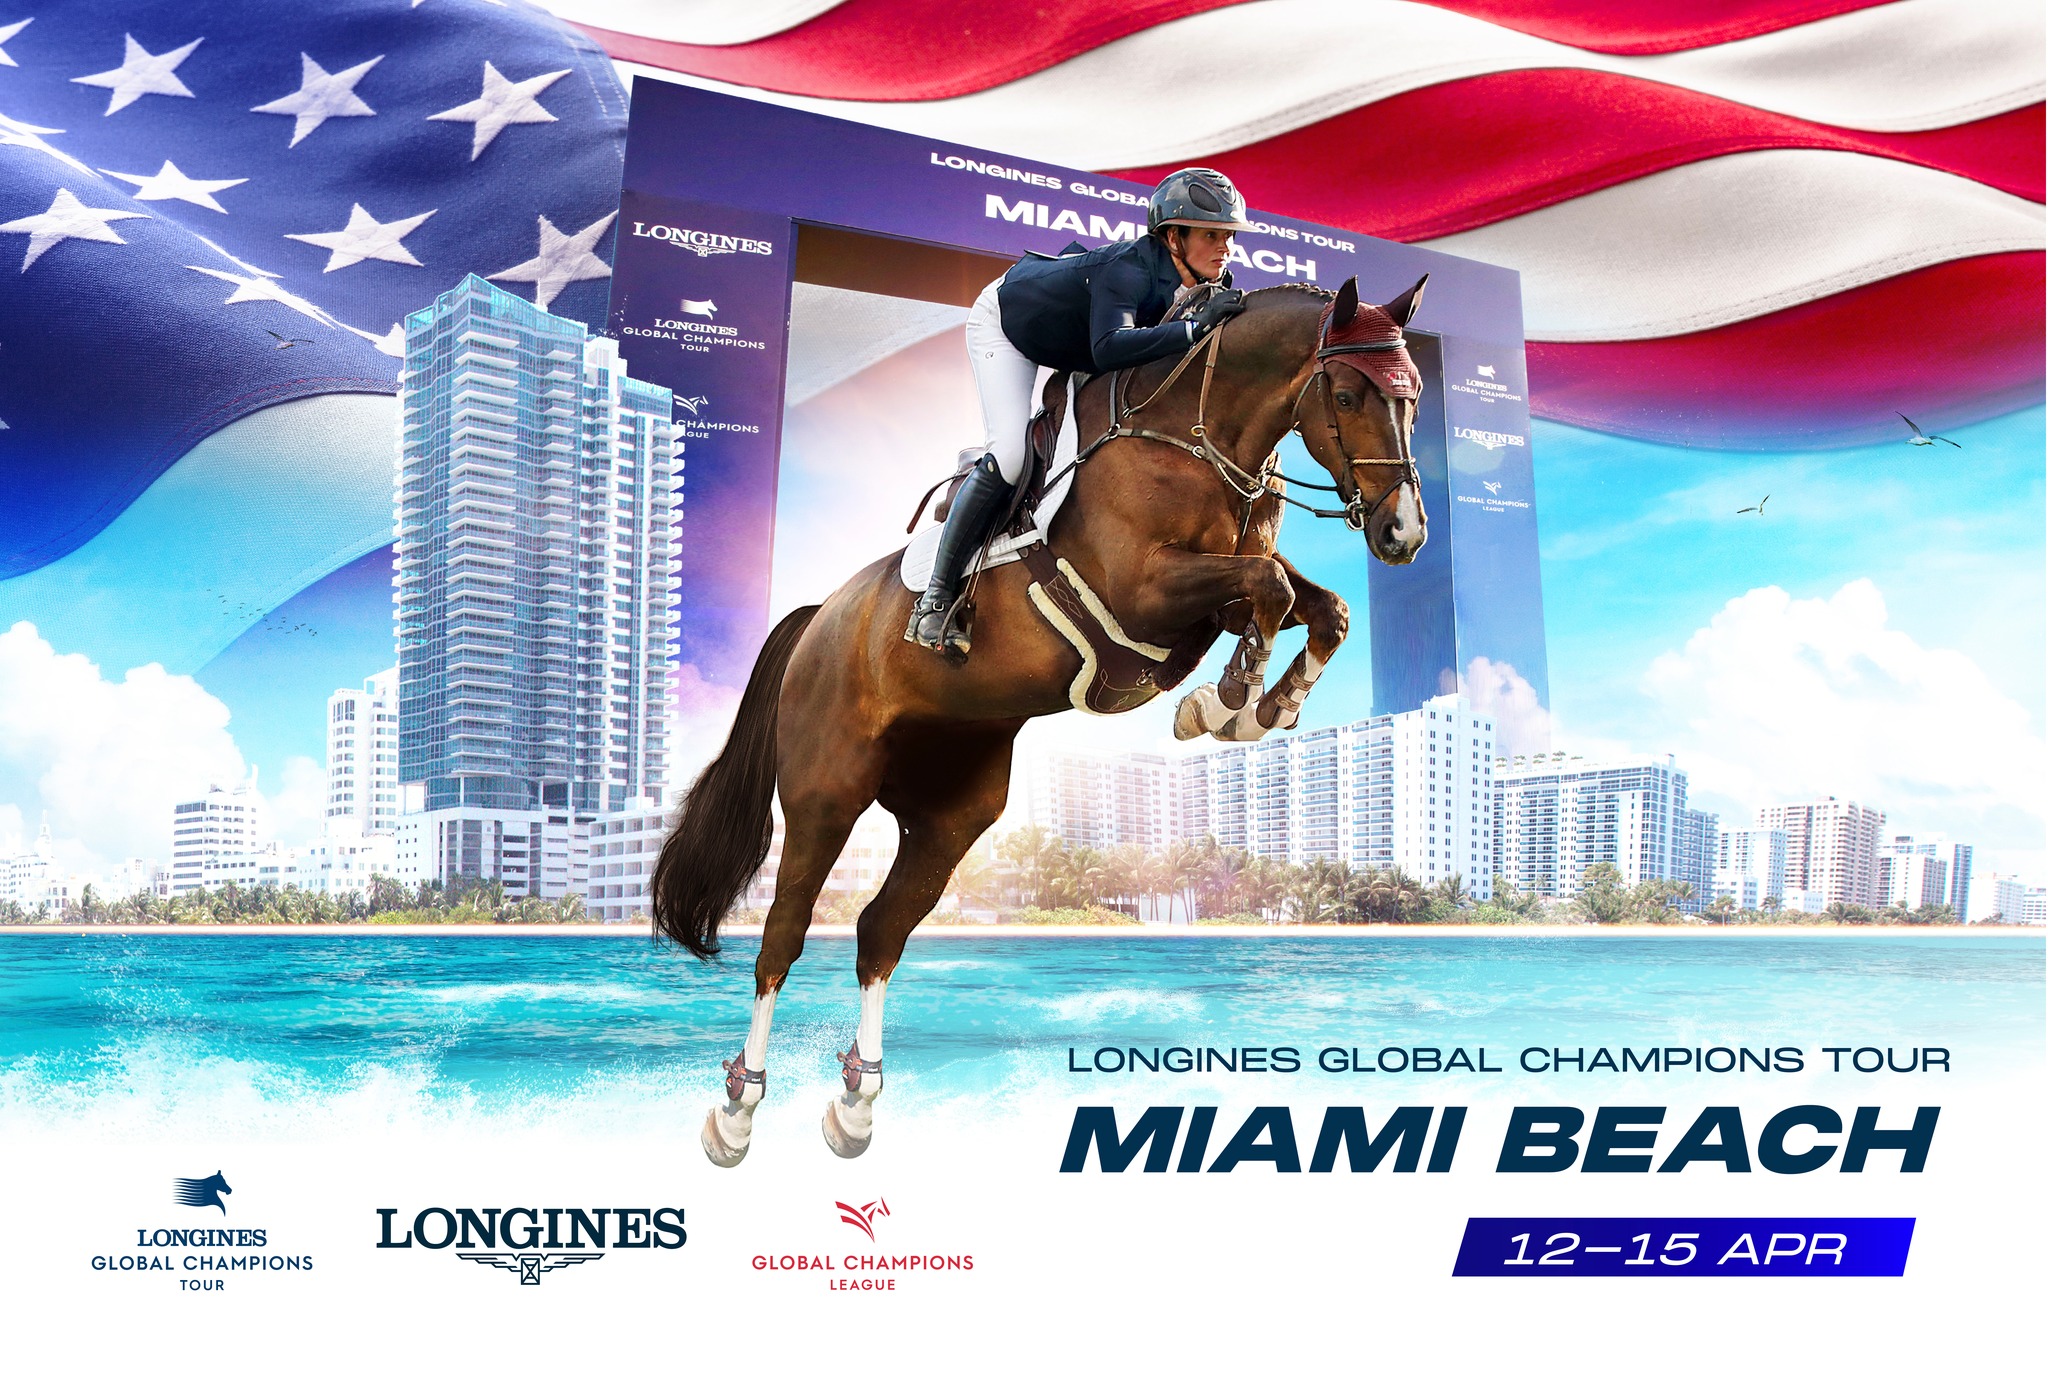 Our logistics and travel servises at the Longines Global Championship